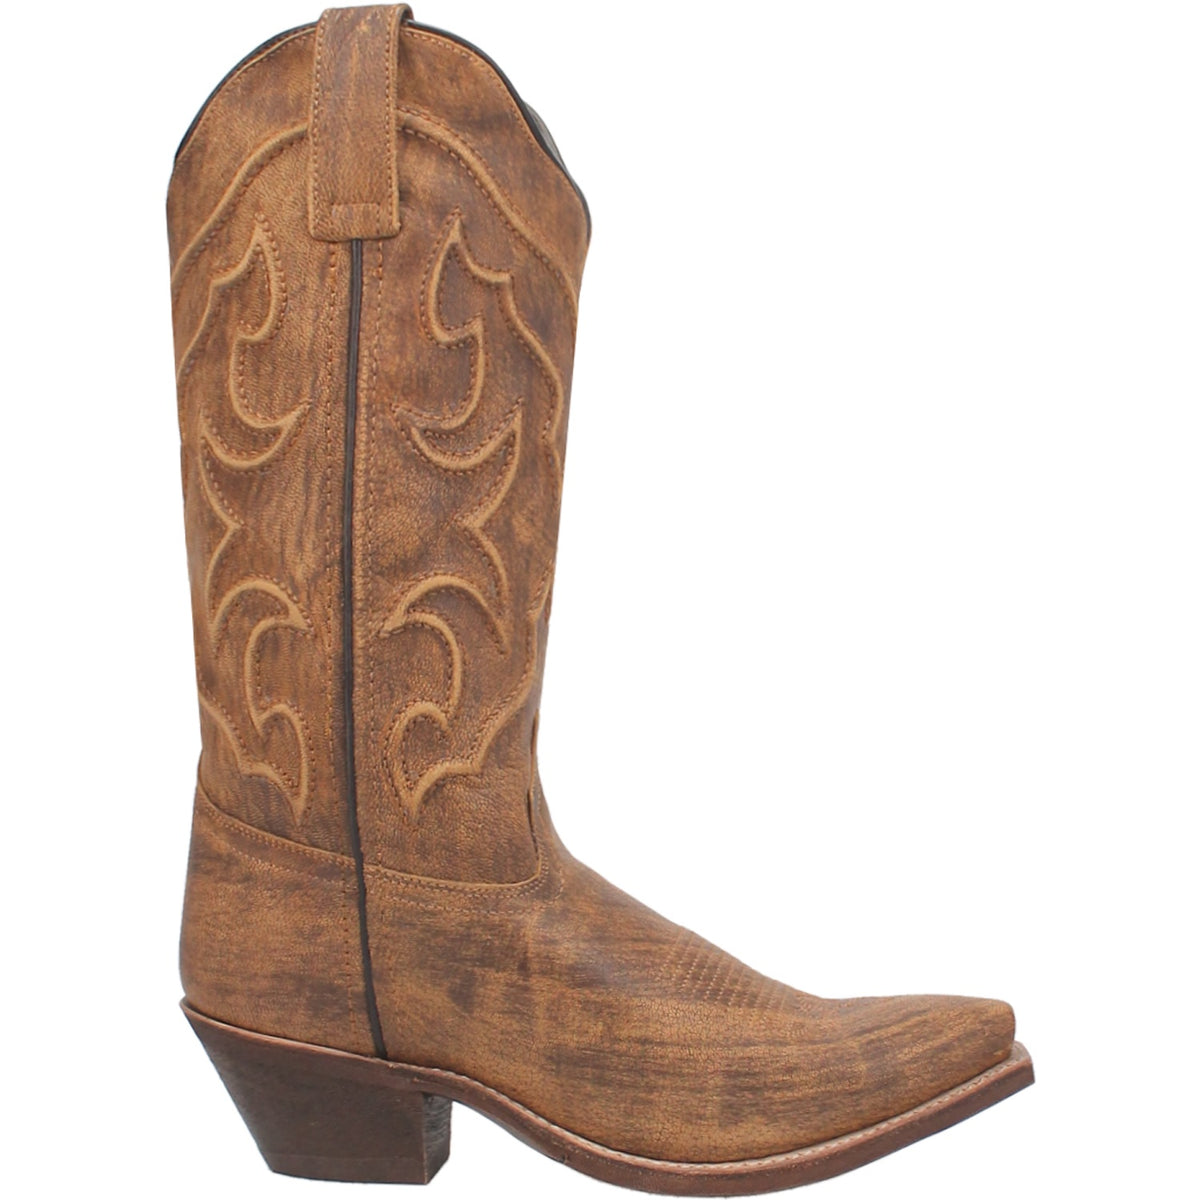 REVA LEATHER BOOT Cover